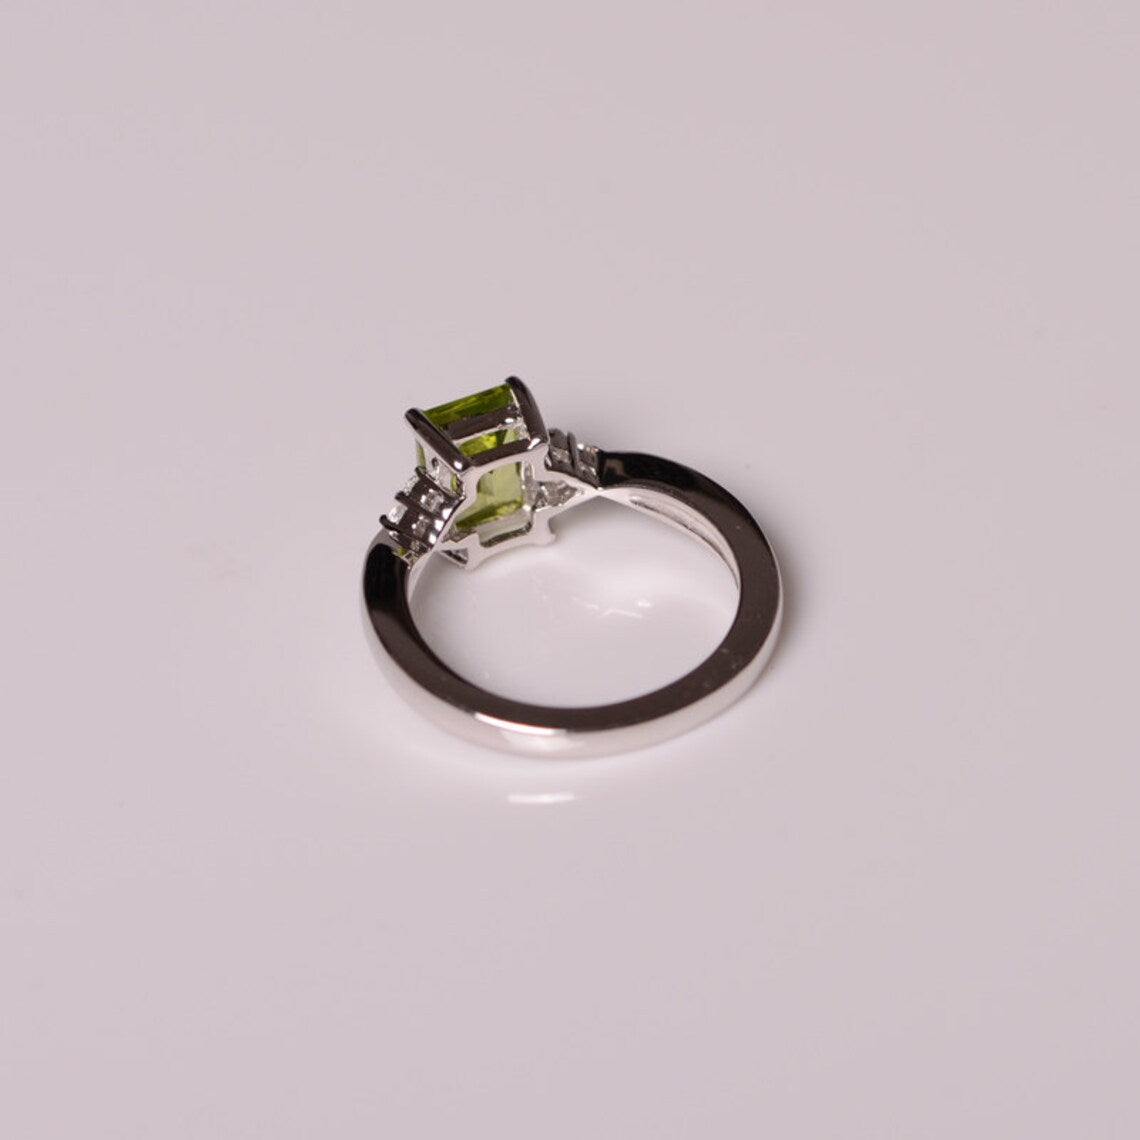 Cute Emerald Cut Peridot Ring - 925 Solid Sterling Silver Ring